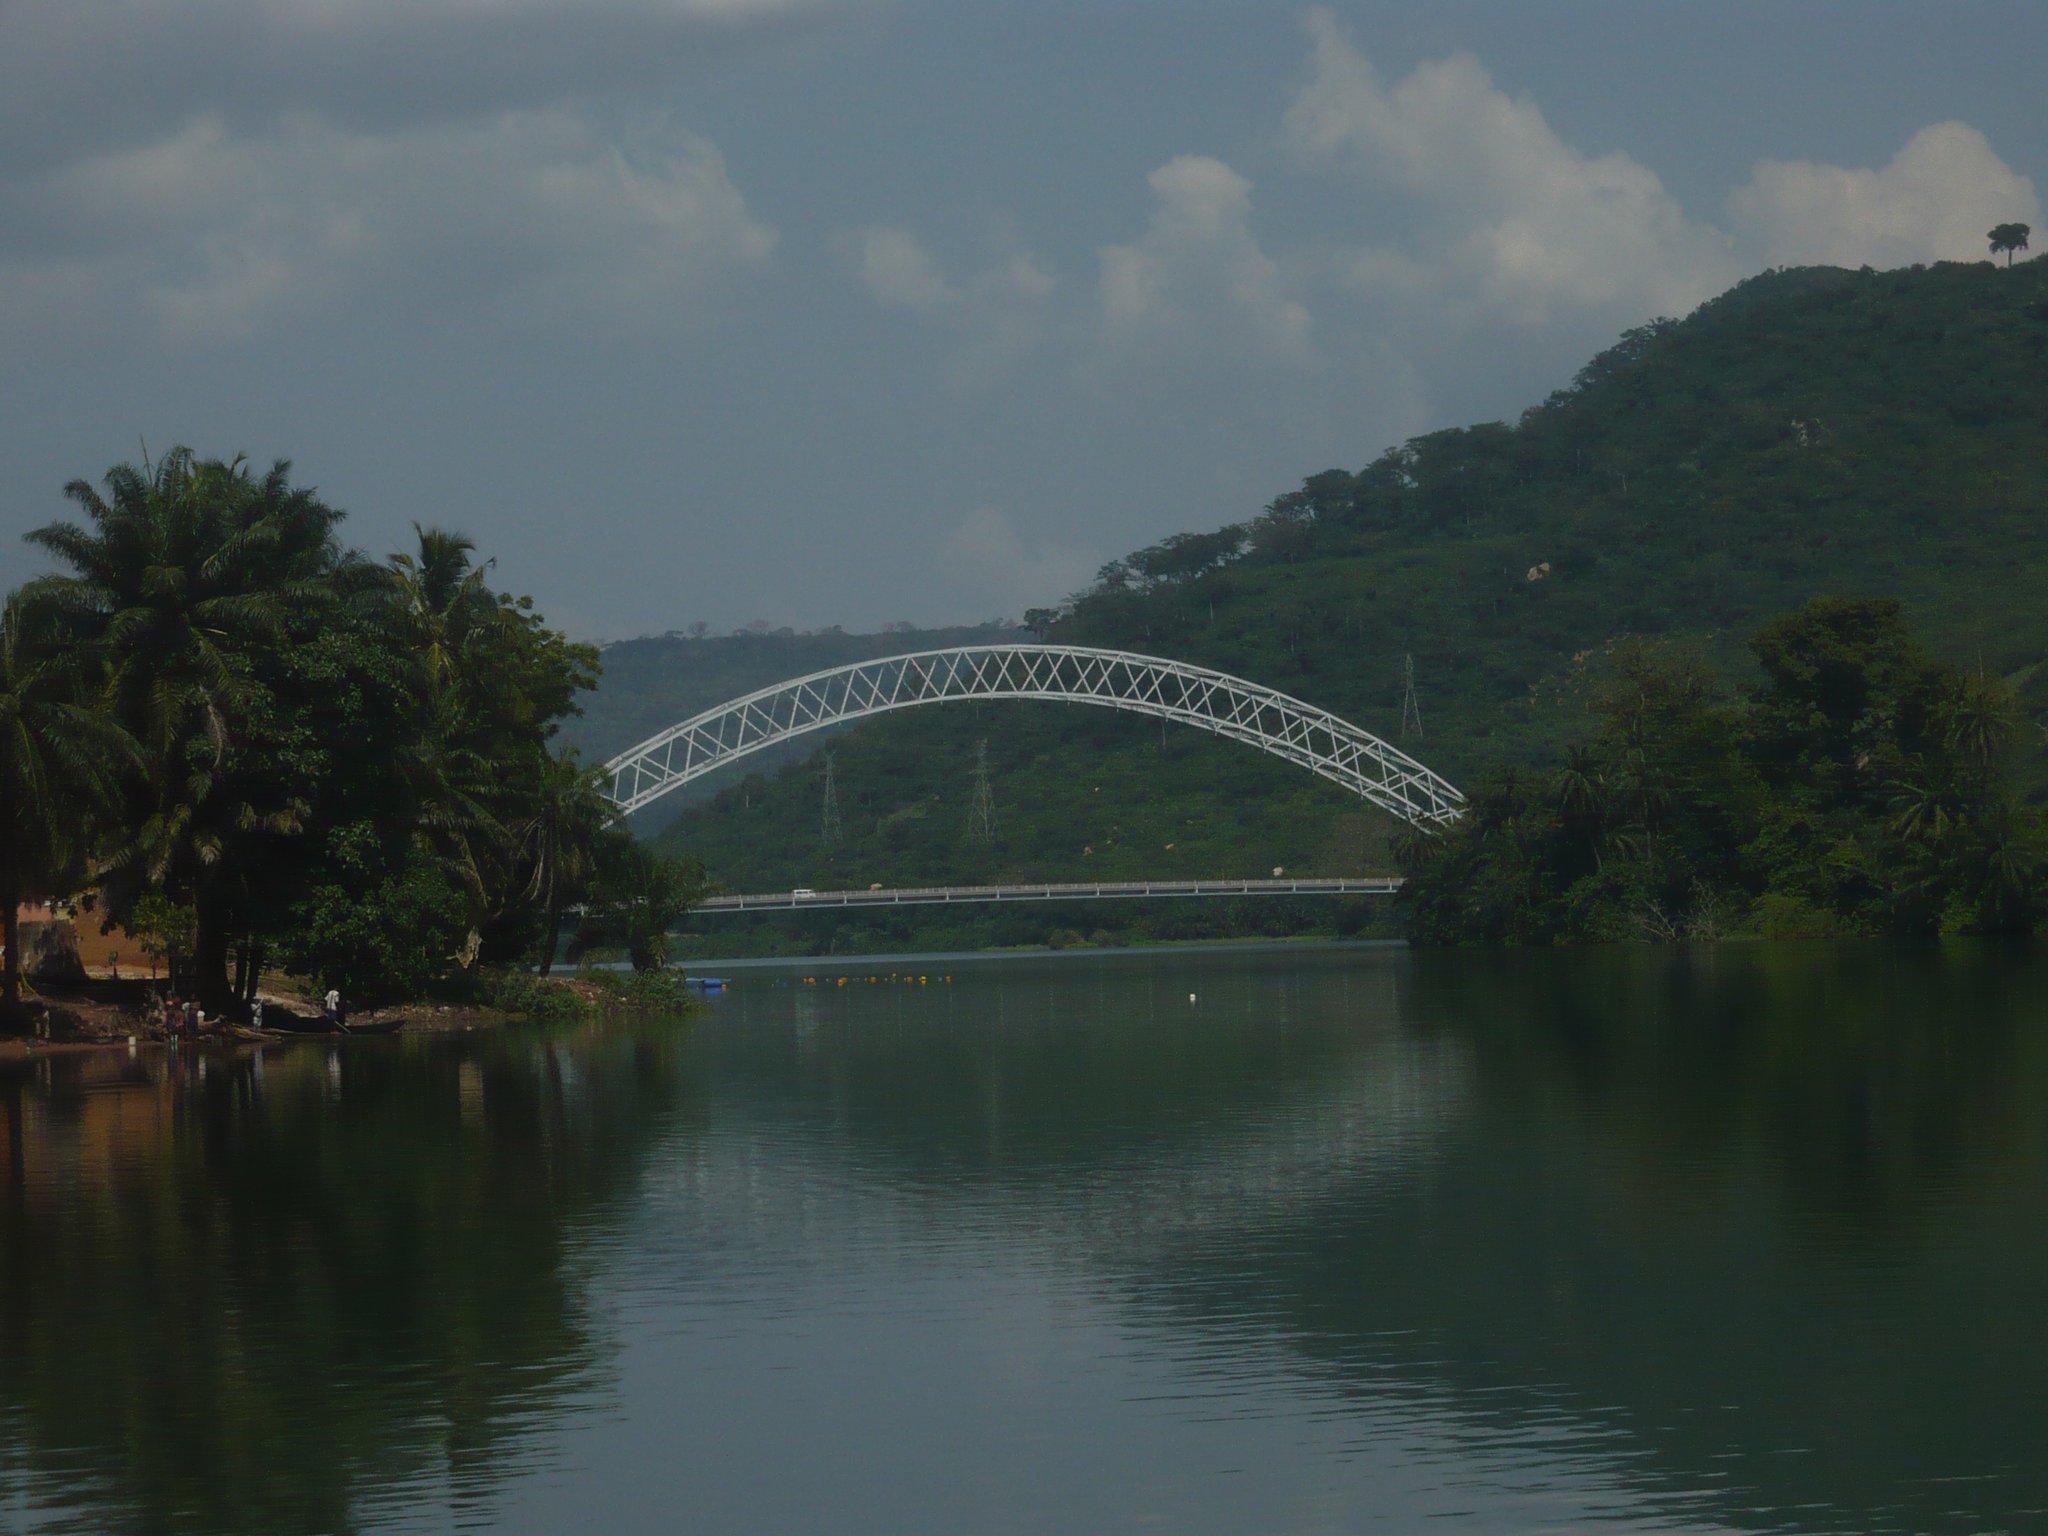 List of major rivers in Ghana and where they are located